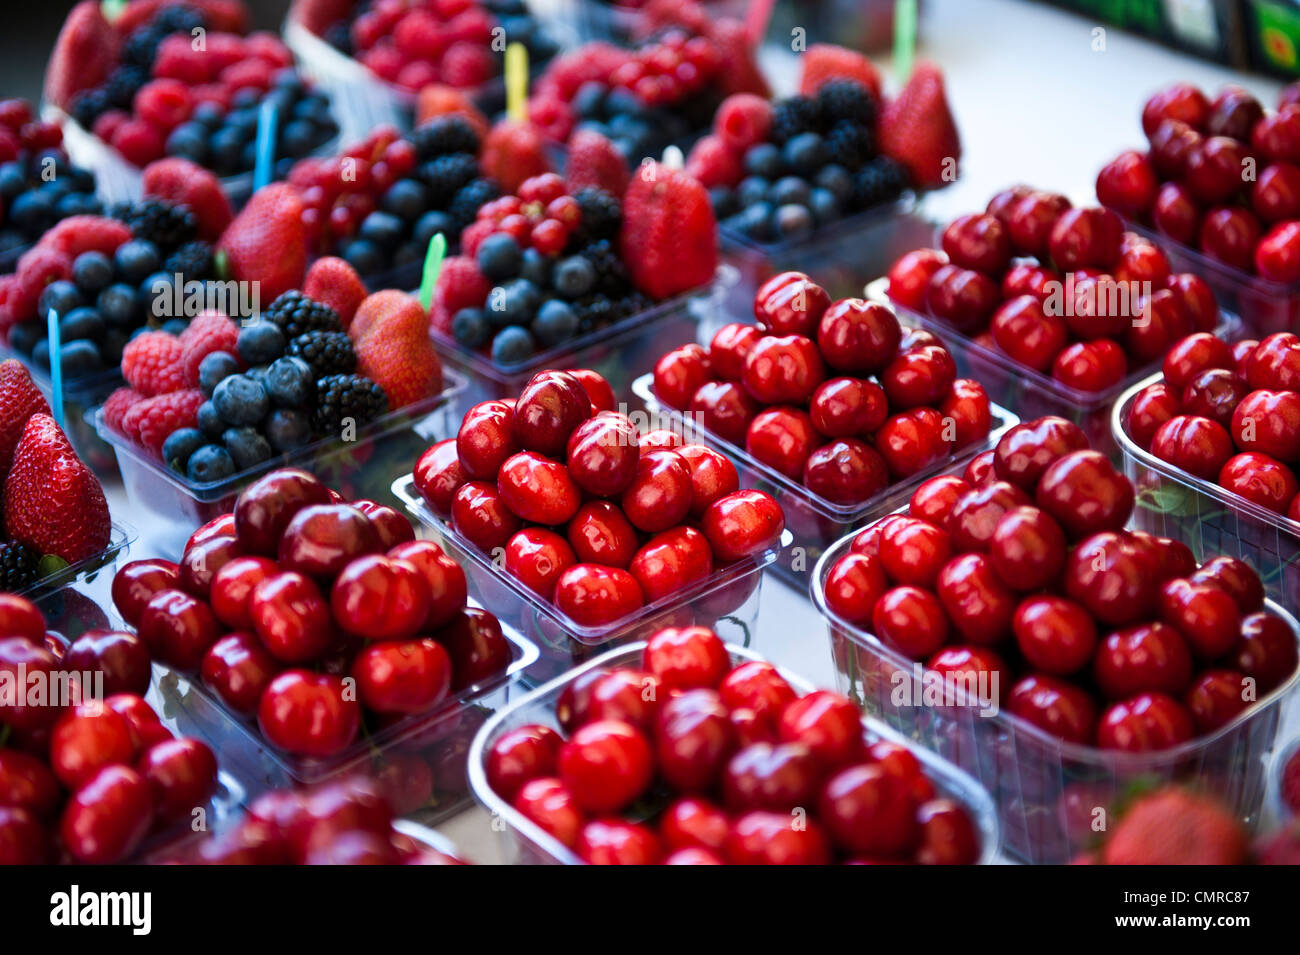 Cherries grouped together in mini clear containers; containers of mixed berries surround the containers of cherries. Stock Photo